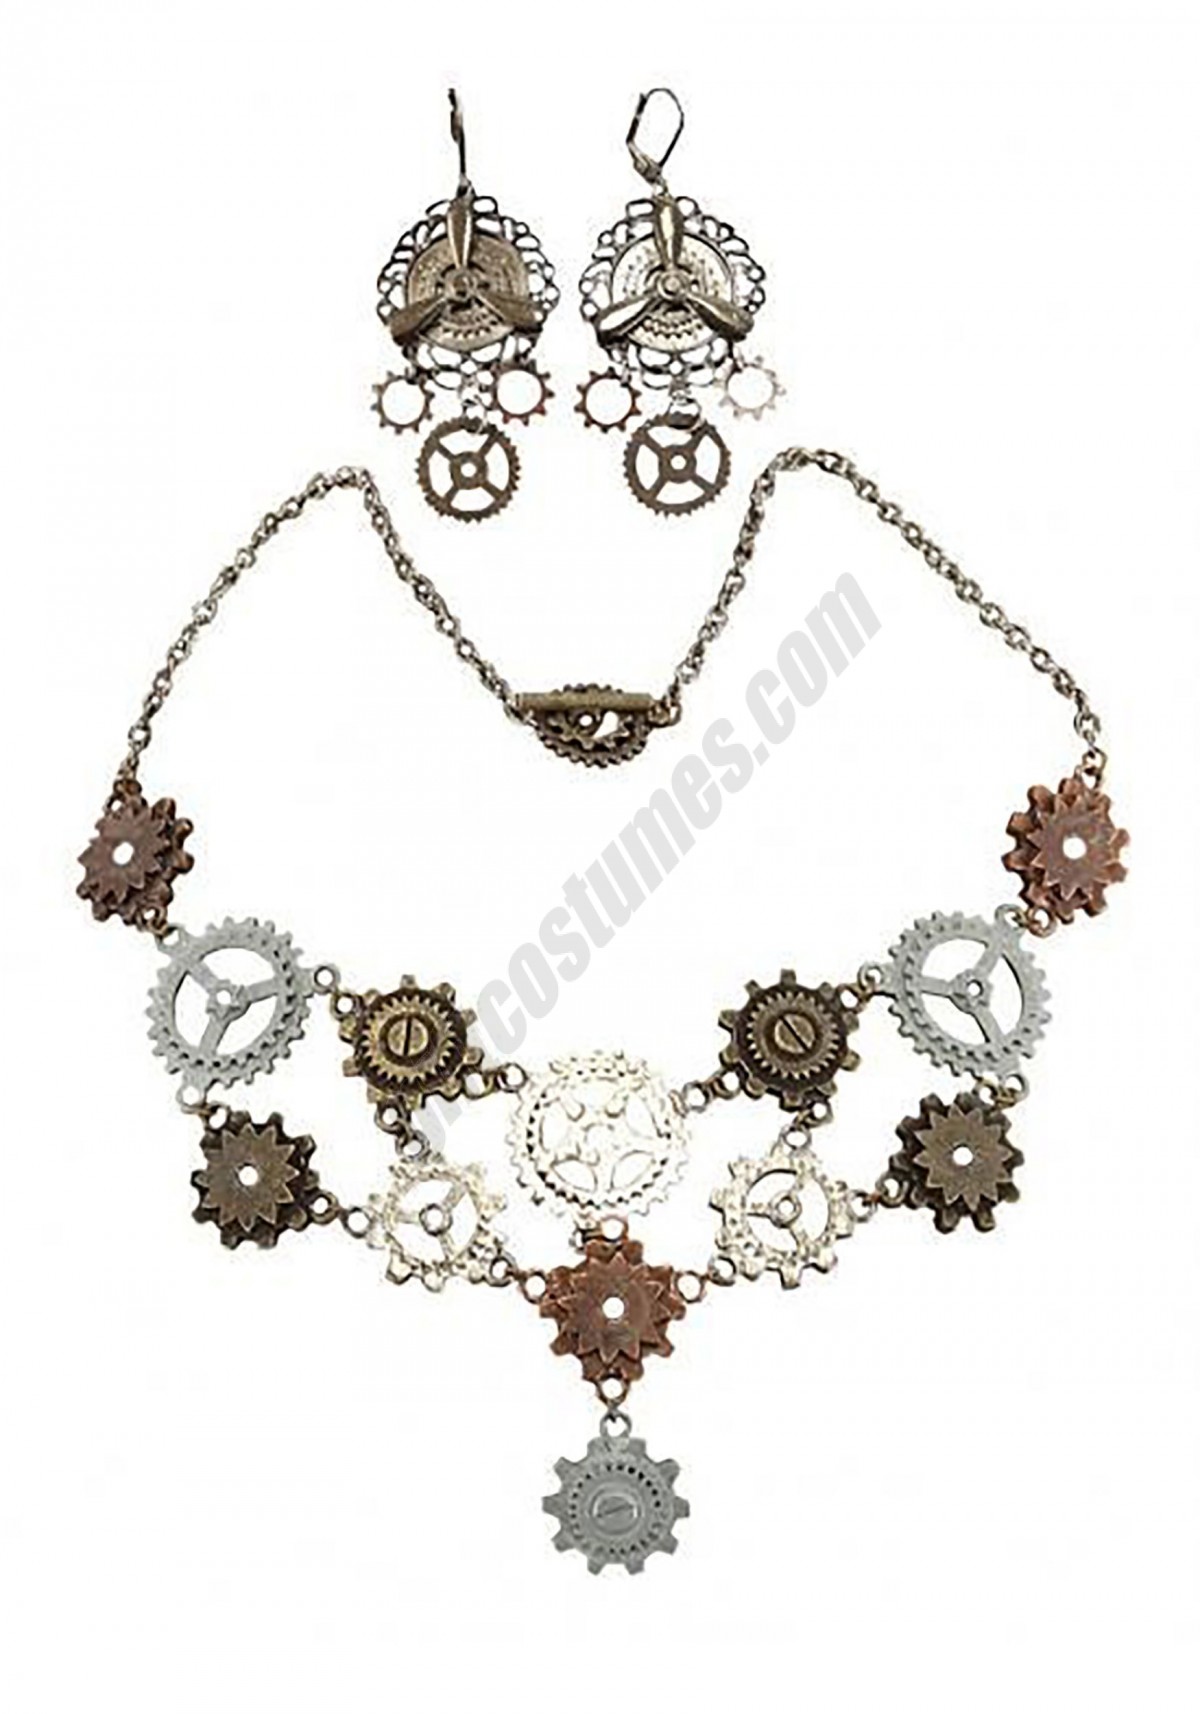 Multi Gear Necklace & Earrings for Adults Promotions - -0